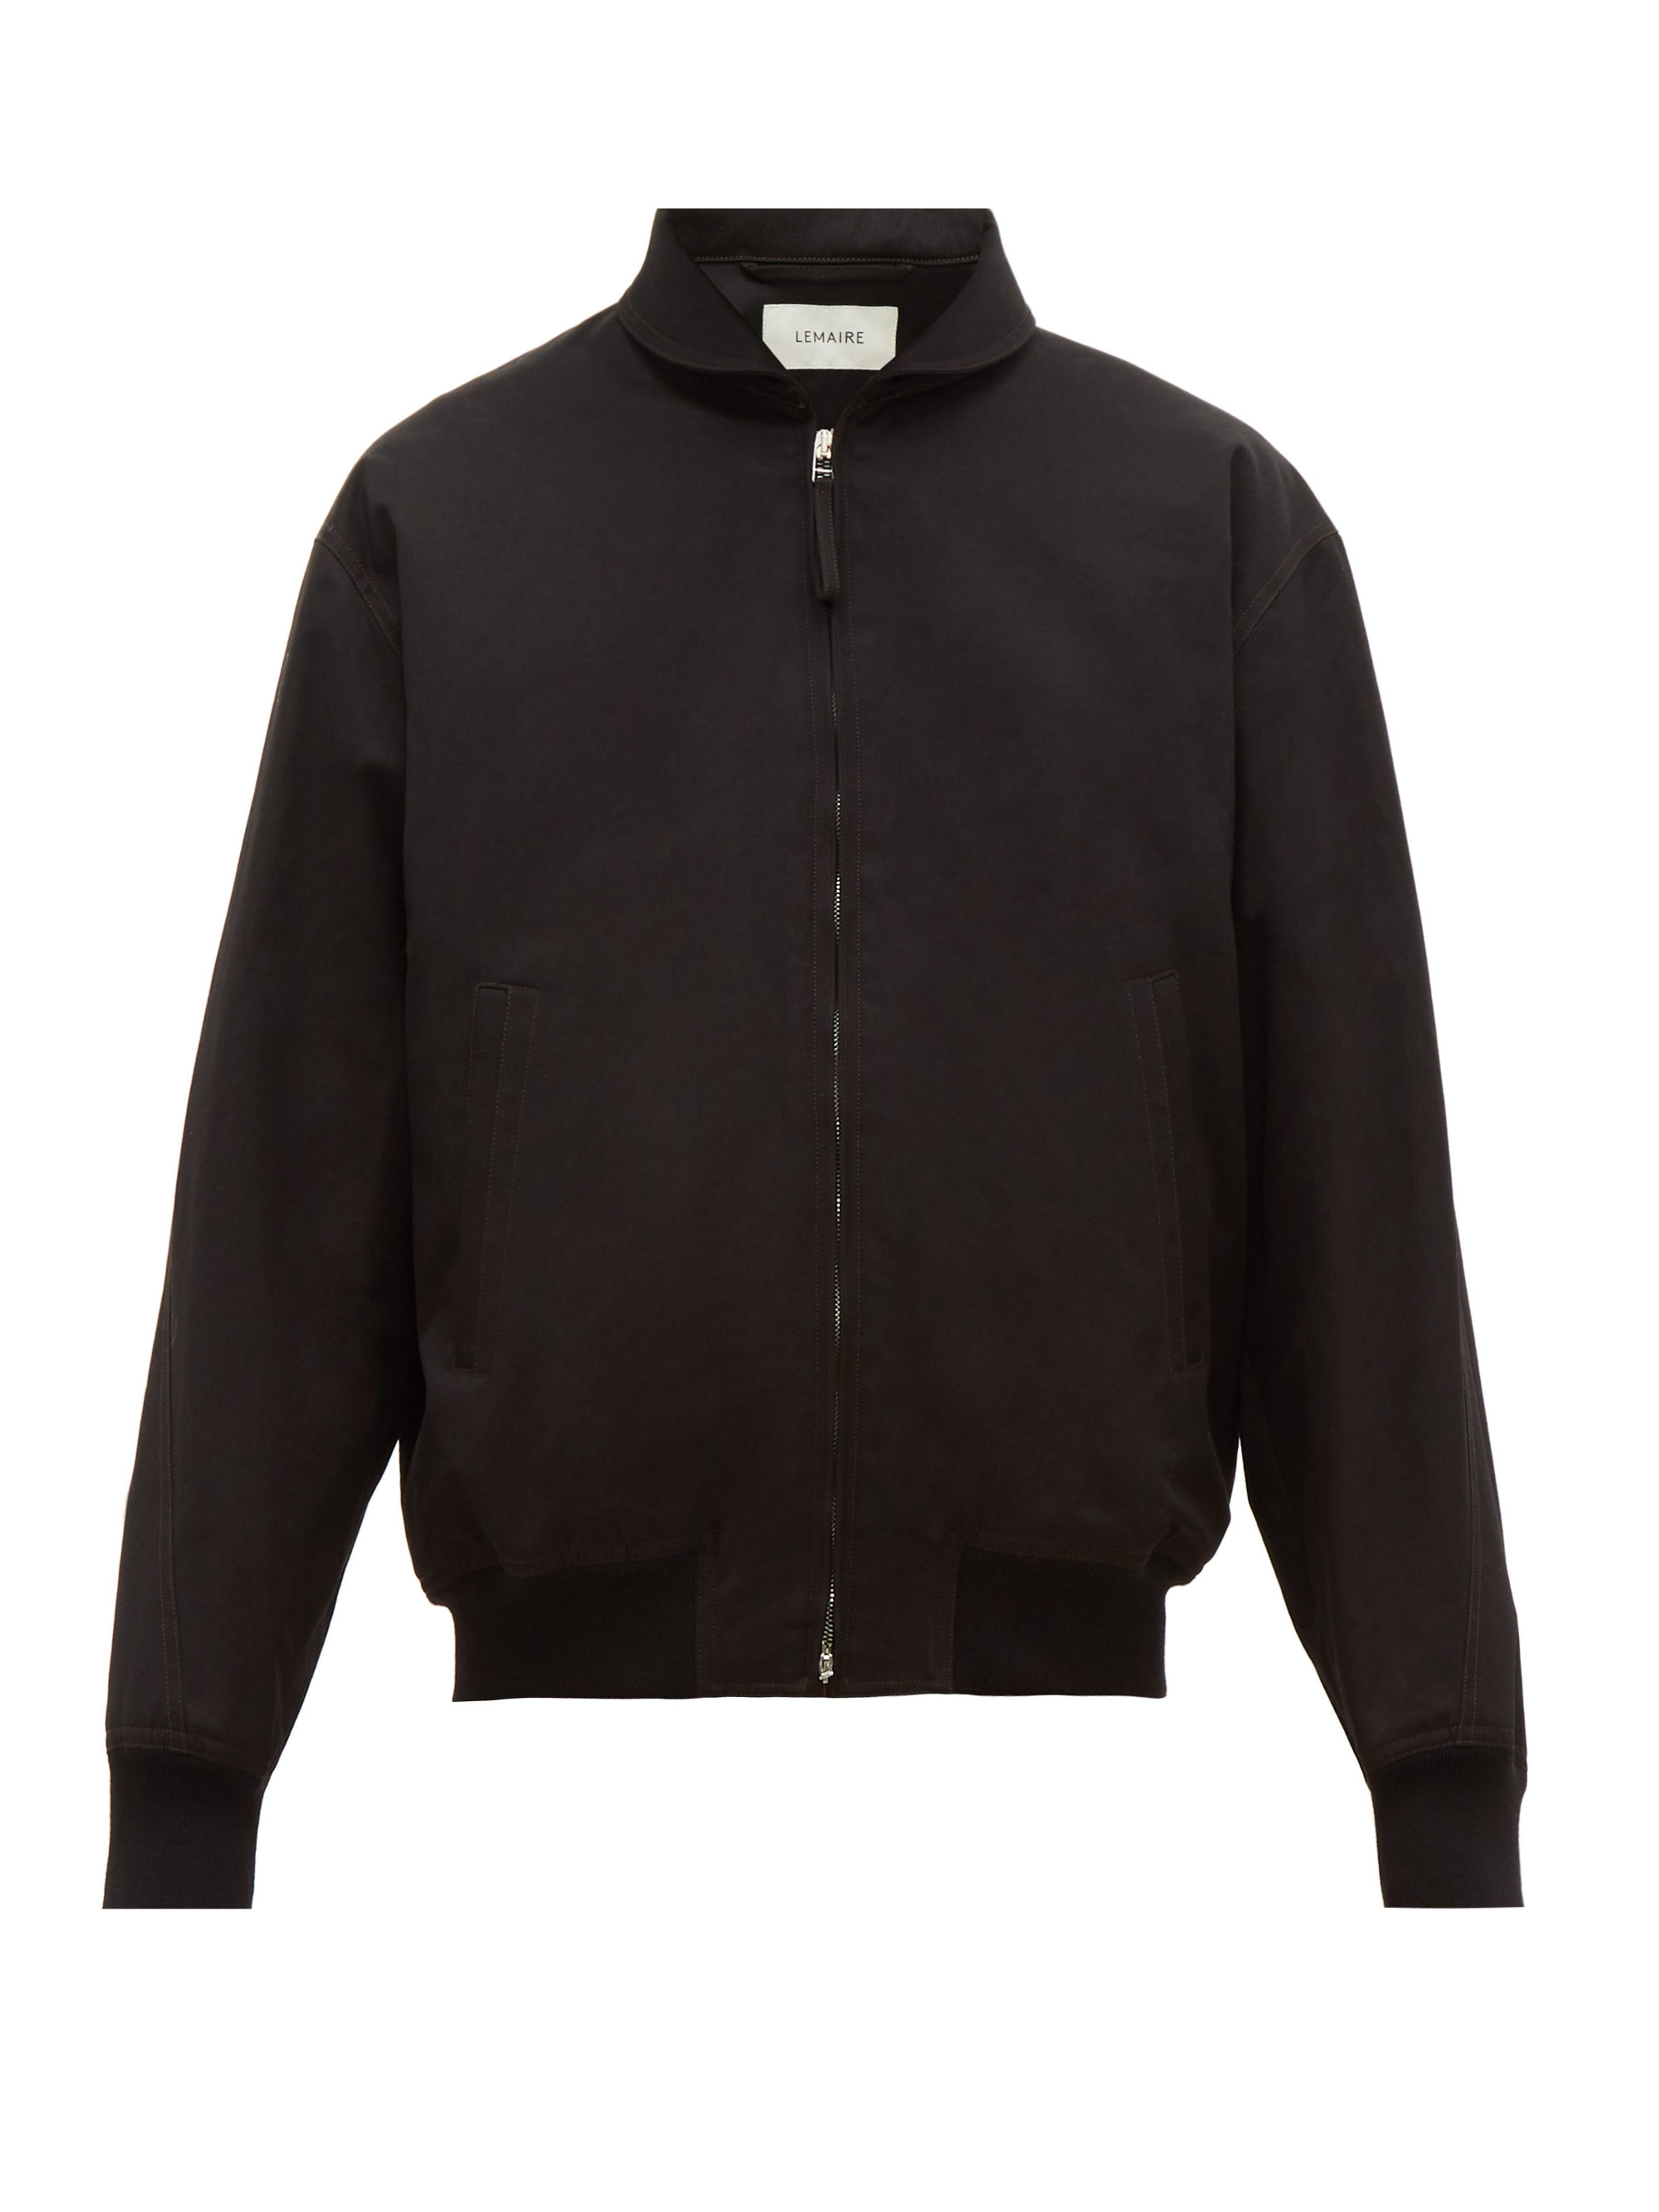 Lemaire Zip Front Cotton Twill Bomber Jacket in Black for Men - Lyst